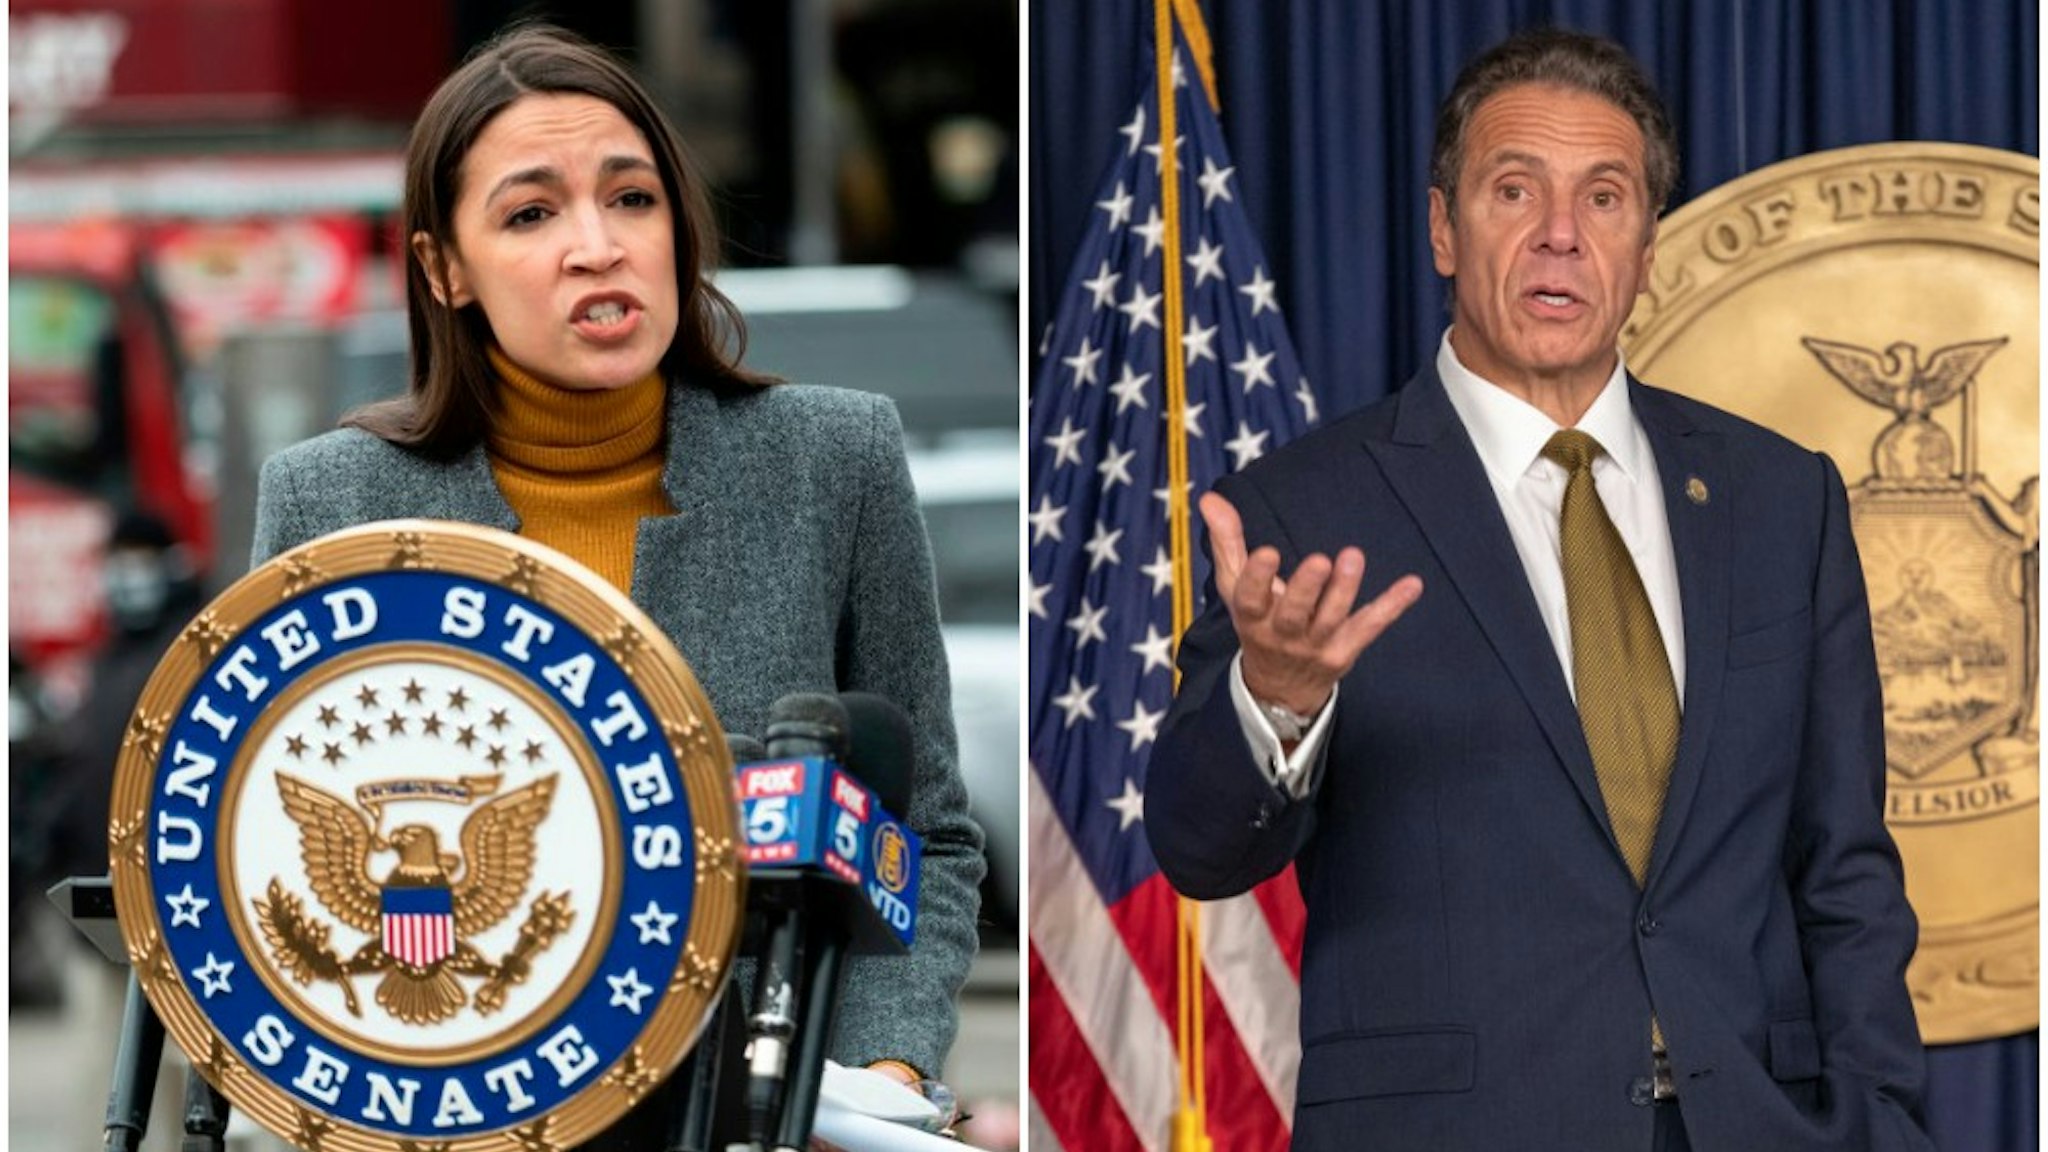 Photo of Alexandria Ocasio-Cortez by JOHANNES EISELE/AFP via Getty Images. Photo of Andrew Cuomo by Jeenah Moon/Bloomberg via Getty Images